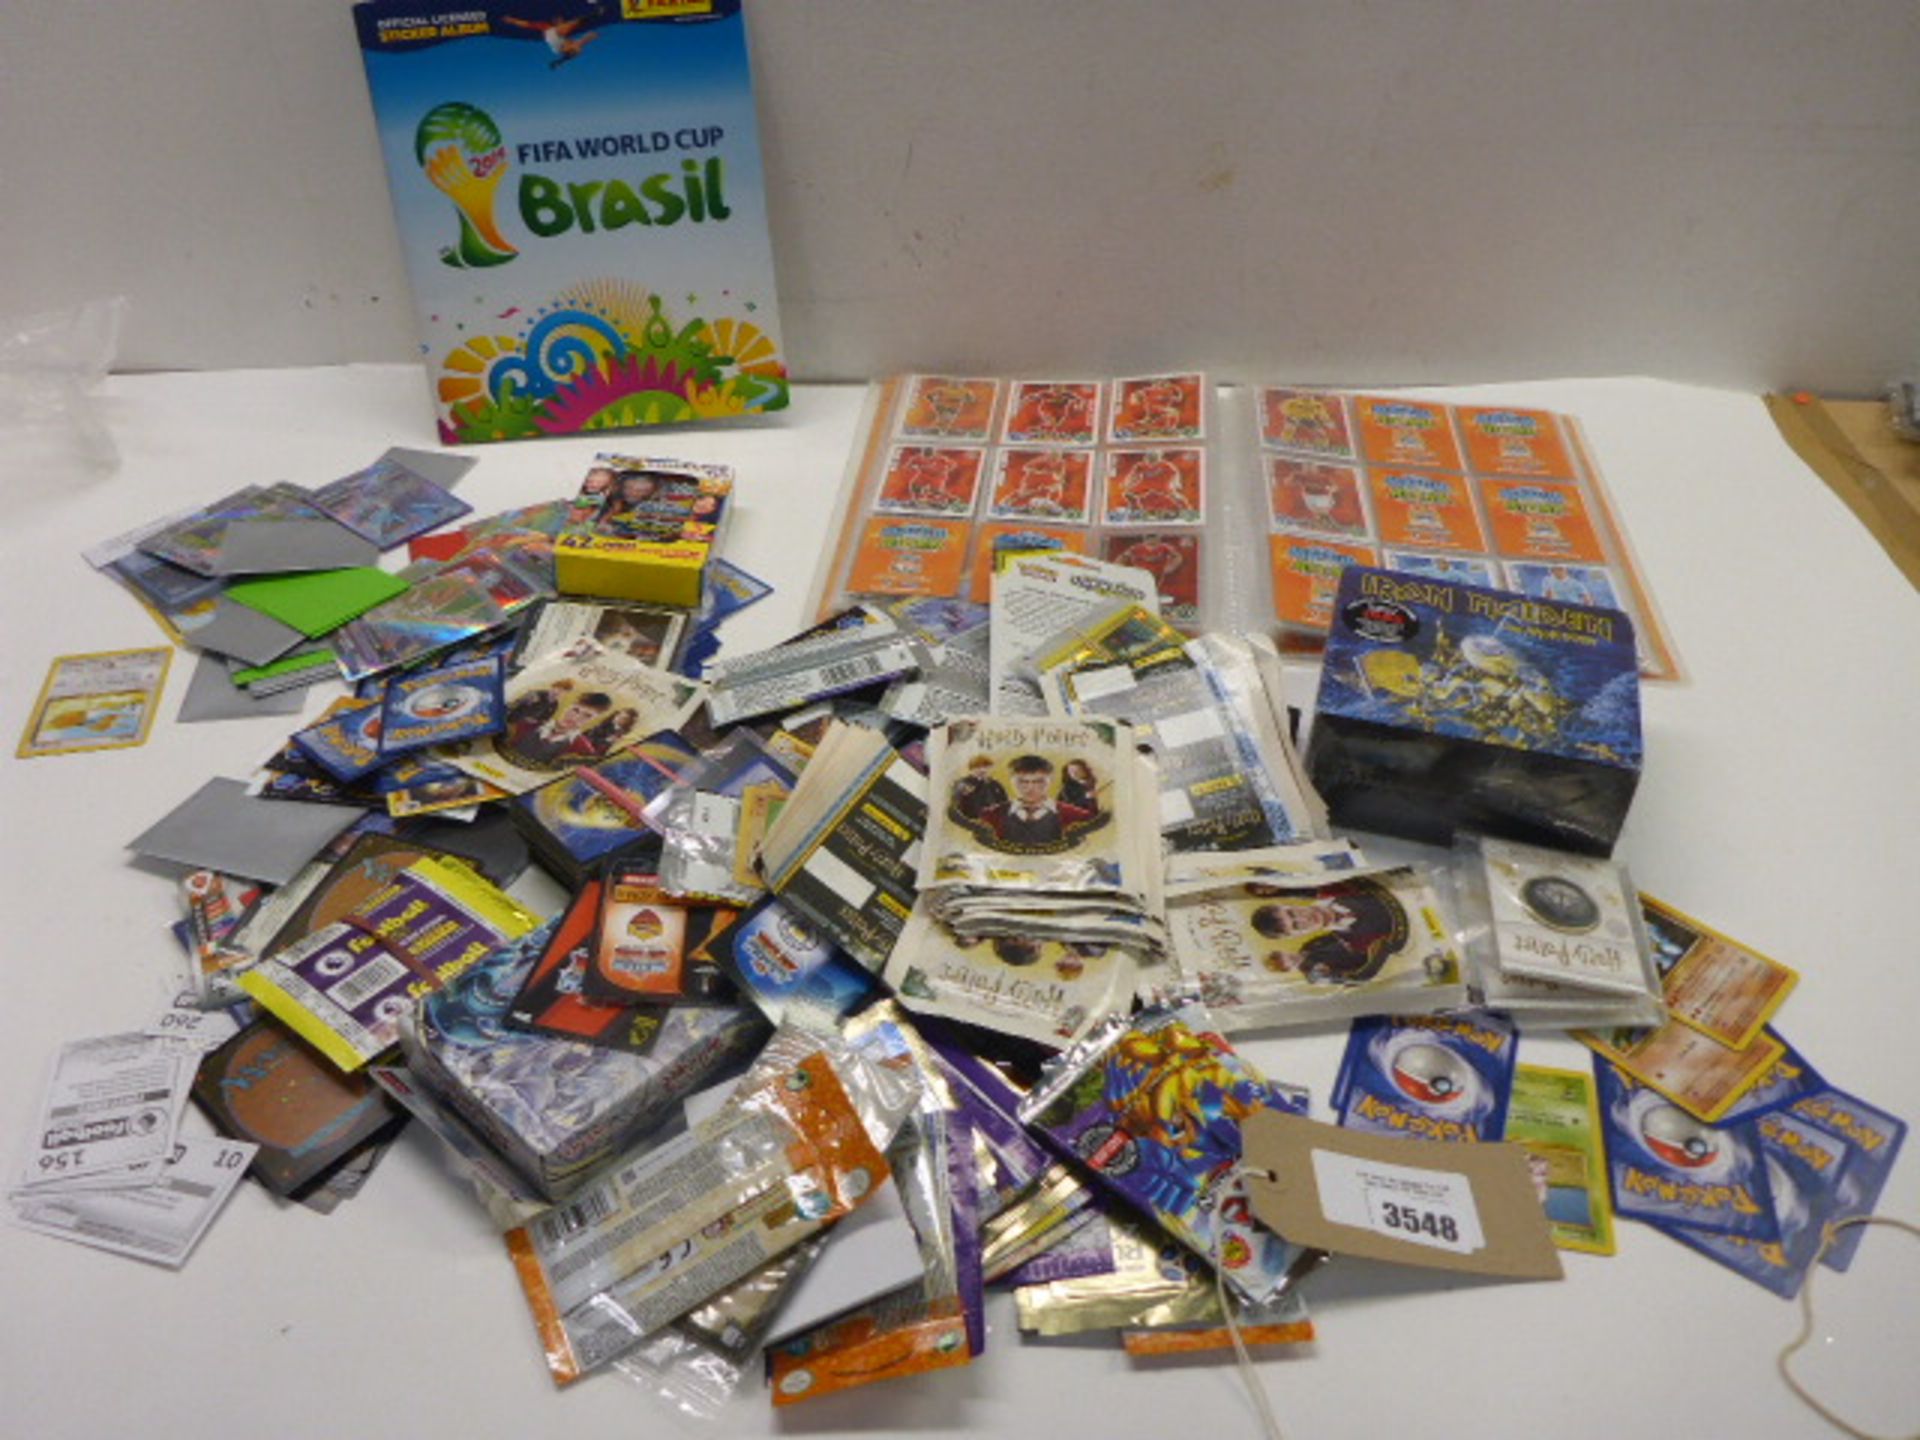 Large quantity of collectable trading cards including Pokemon, Match Attach, Fifa World Cup, Harry